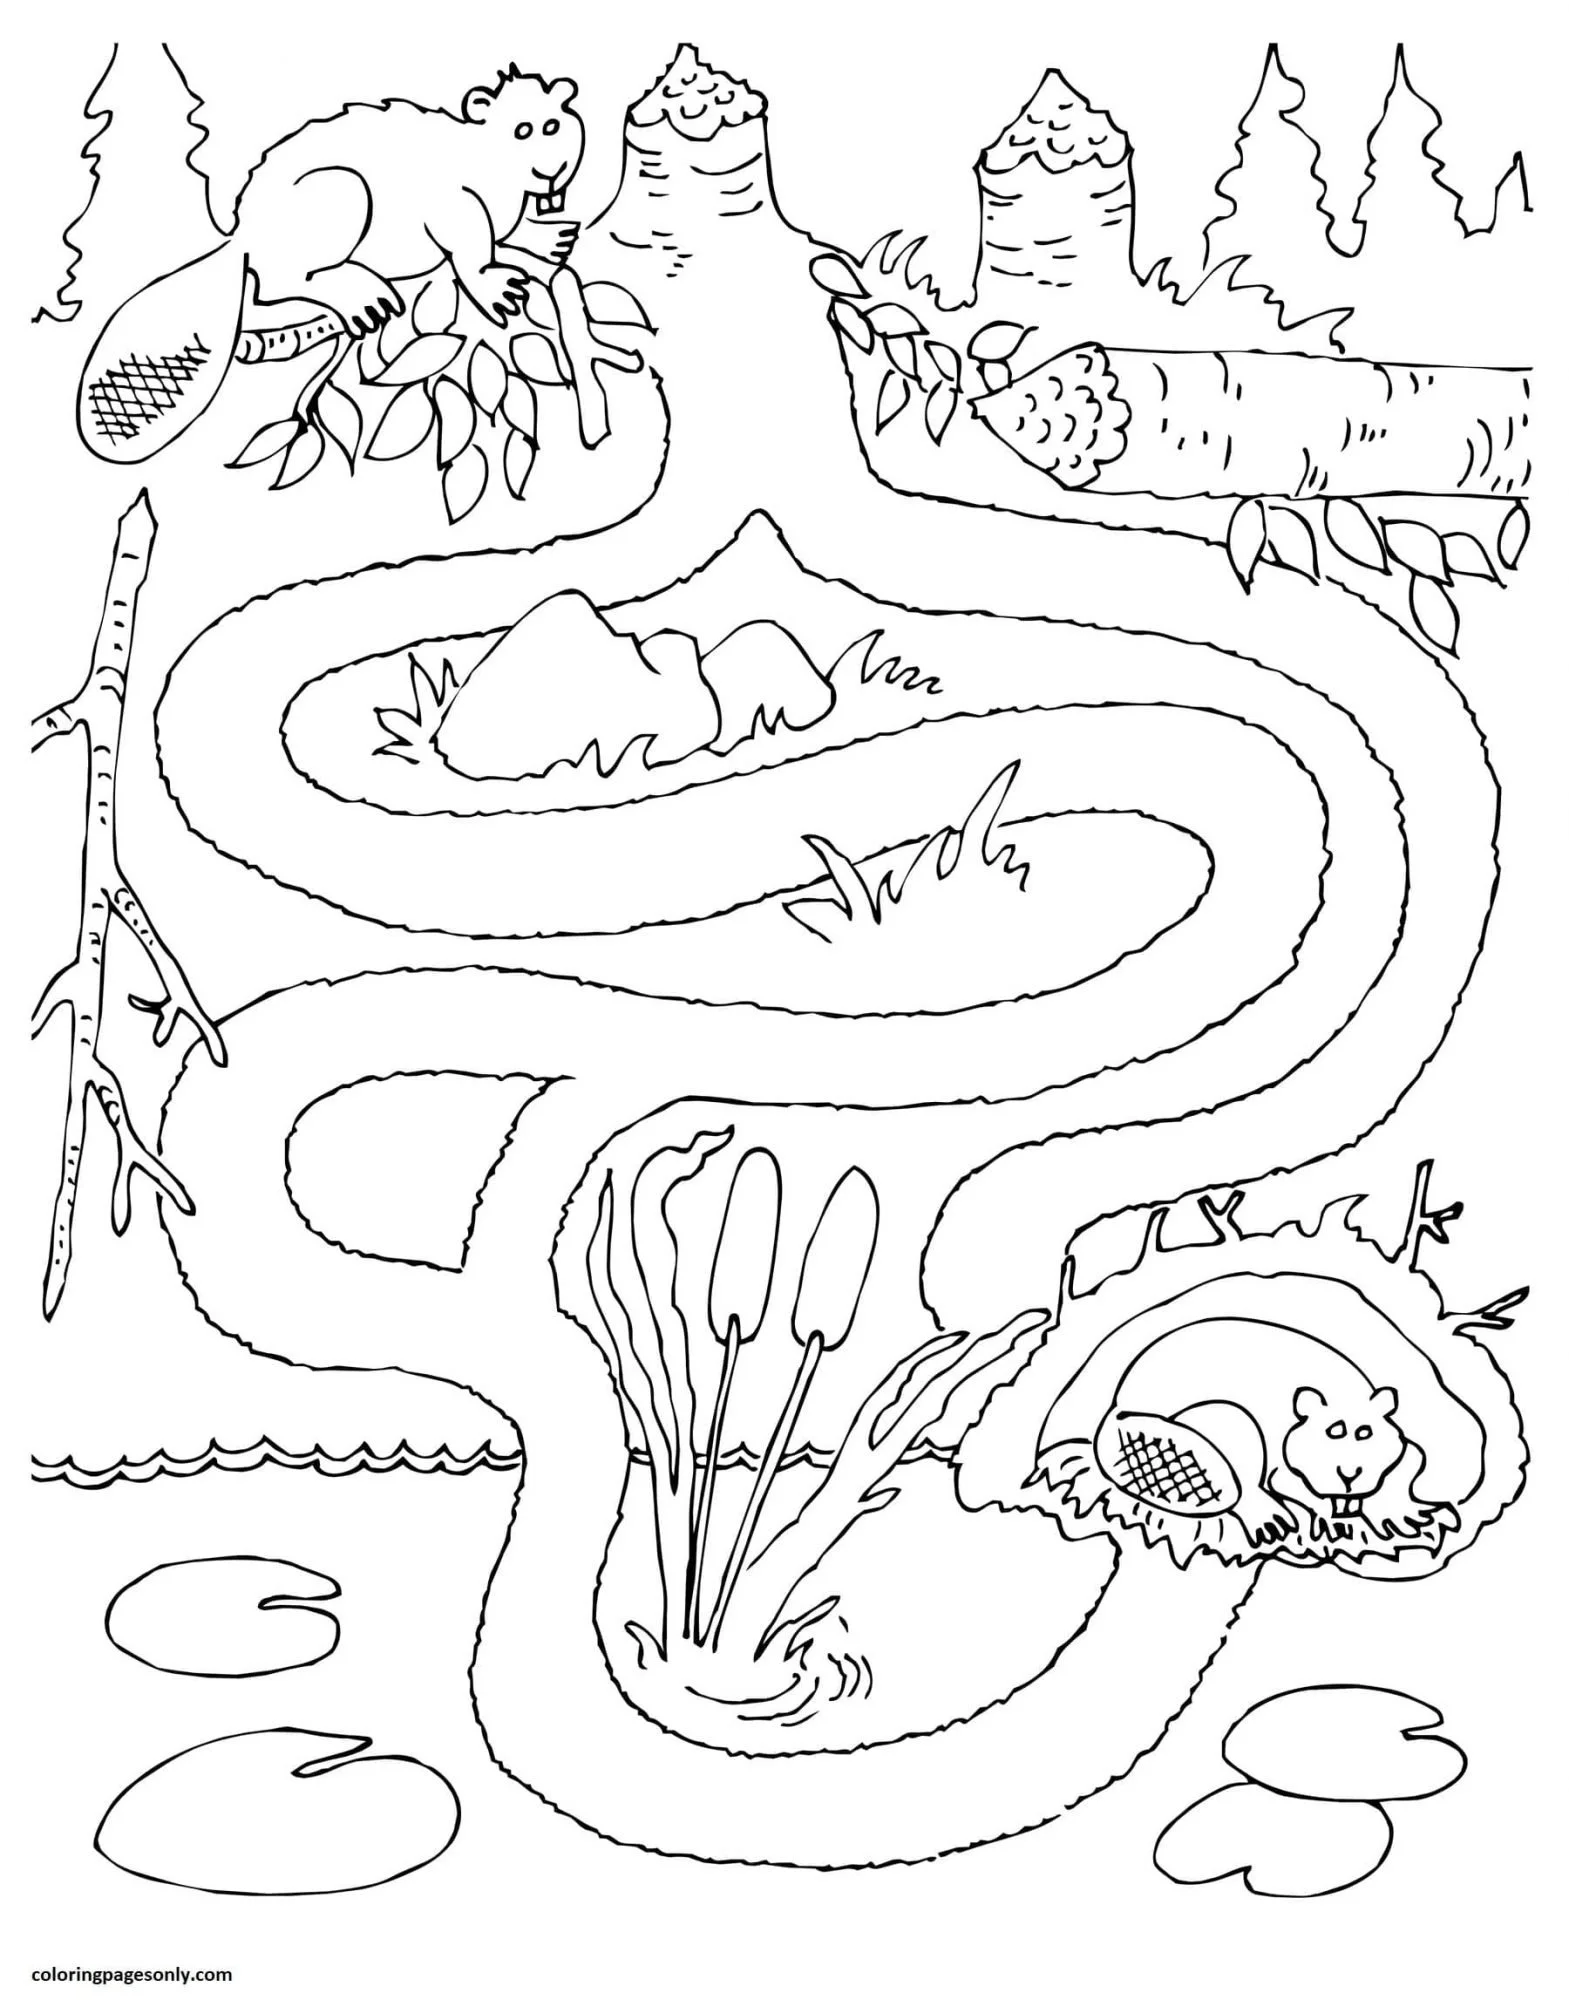 Rivers Coloring Pages